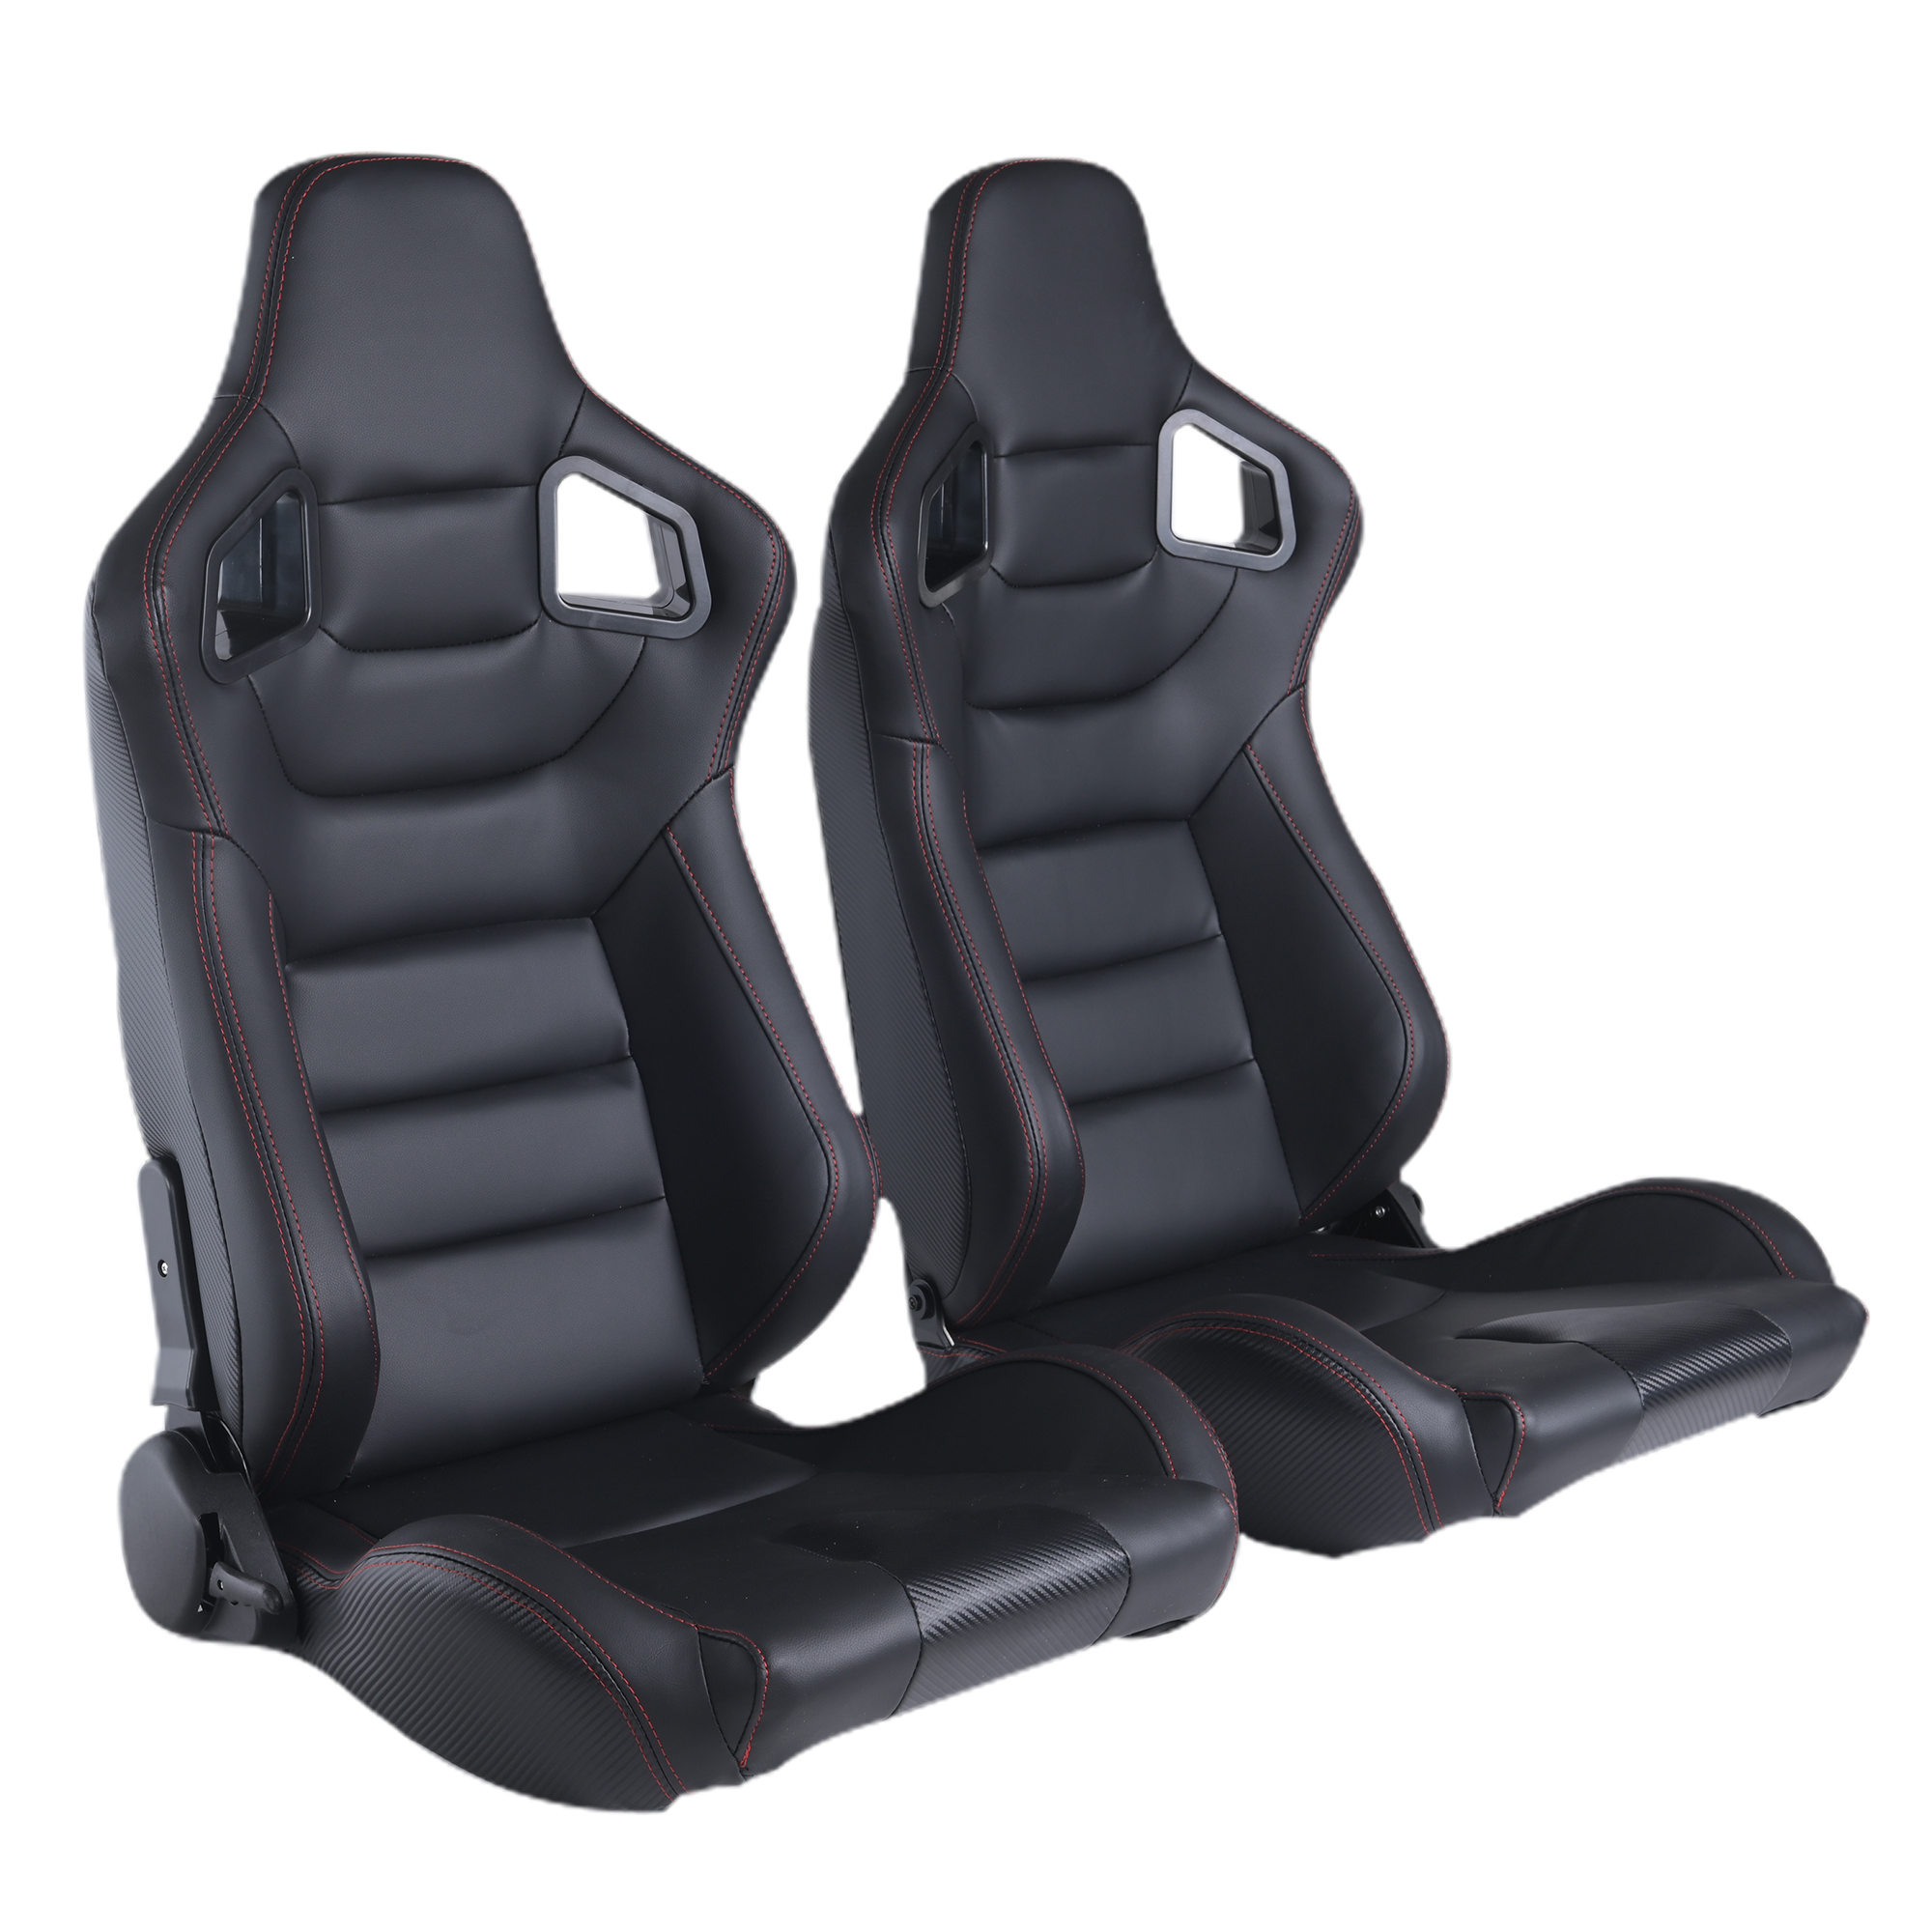 RACING SEAT  ALL BLACK SIMULATOR LEATHER WITH DOUBLE SLIDER 2PCS-CASAINC